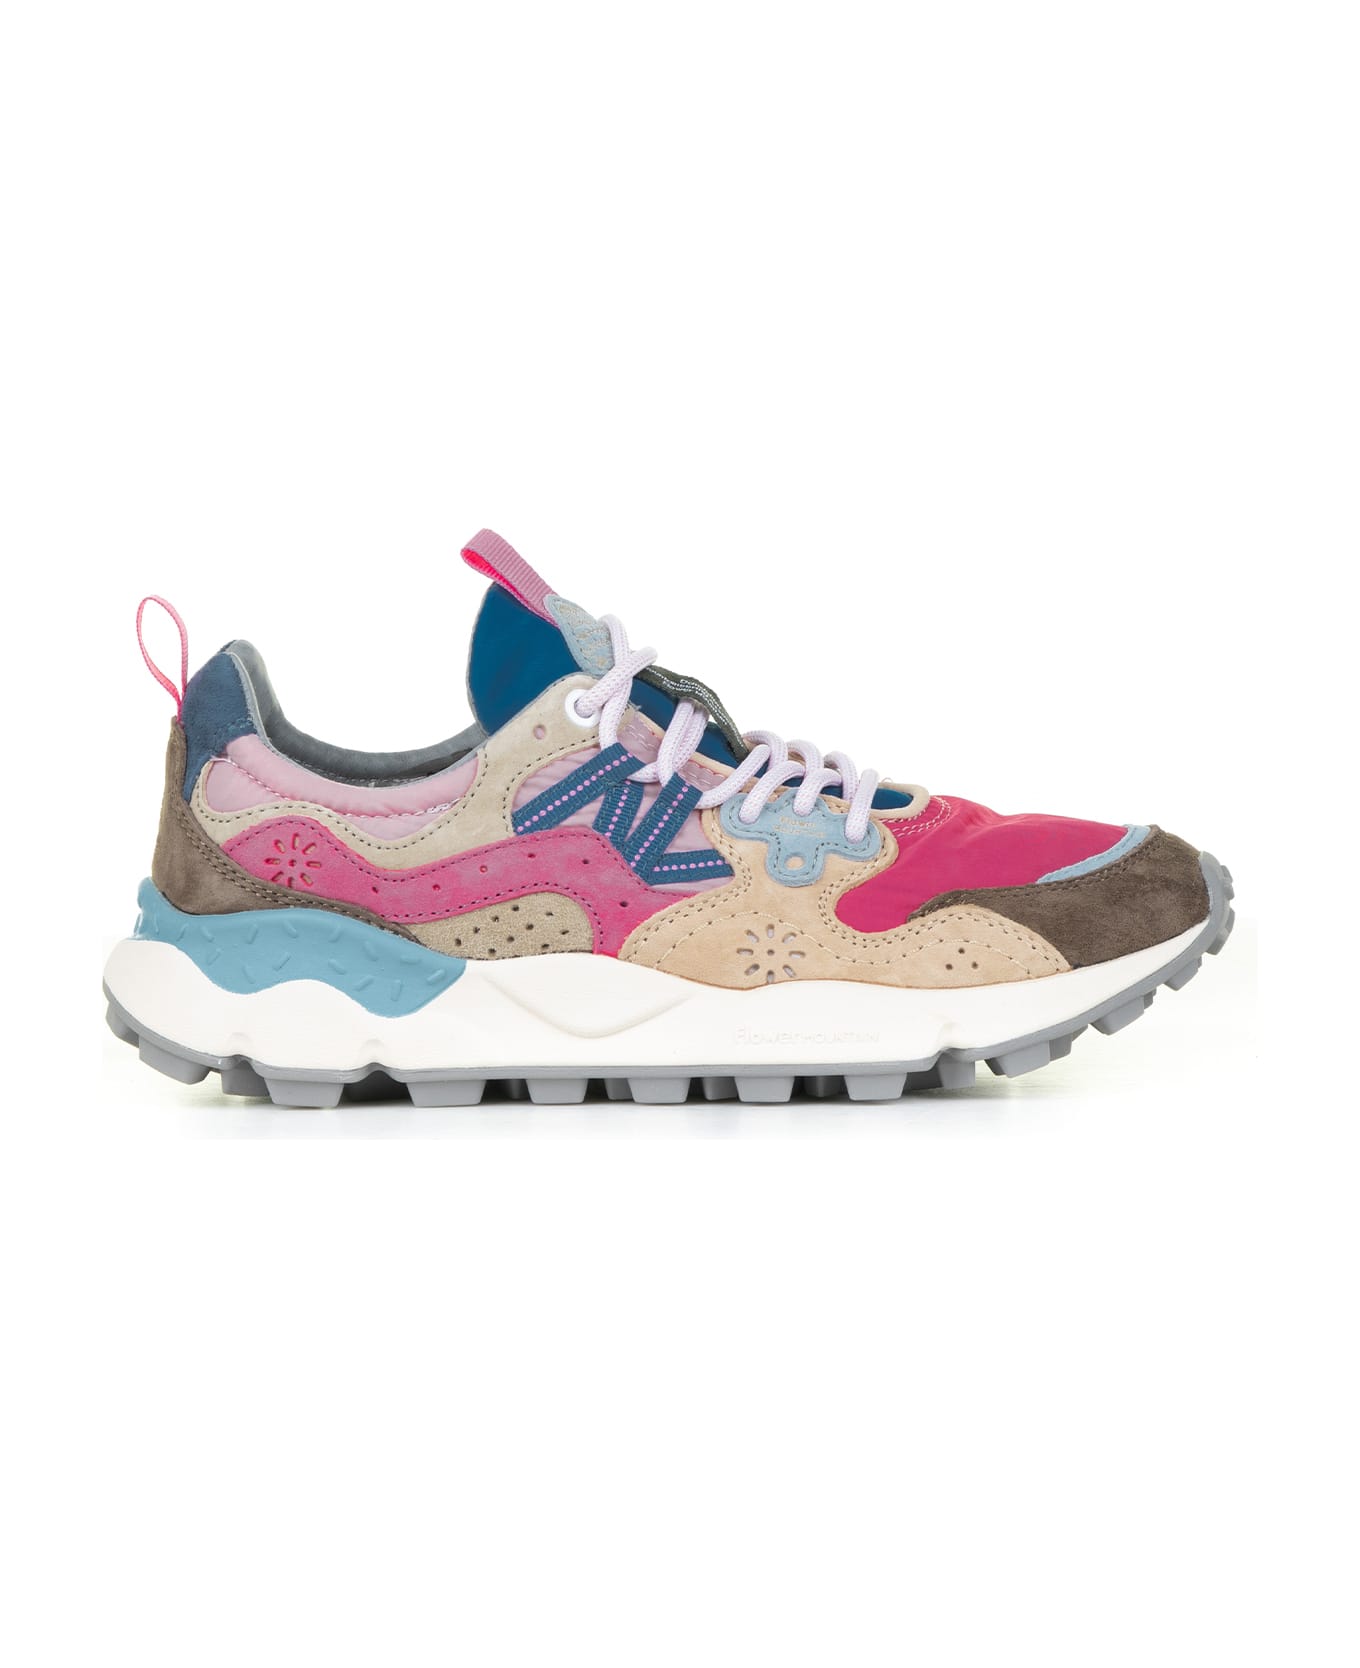 Flower Mountain Multicolored Yamano Sneakers In Suede And Nylon - PINK MULTI